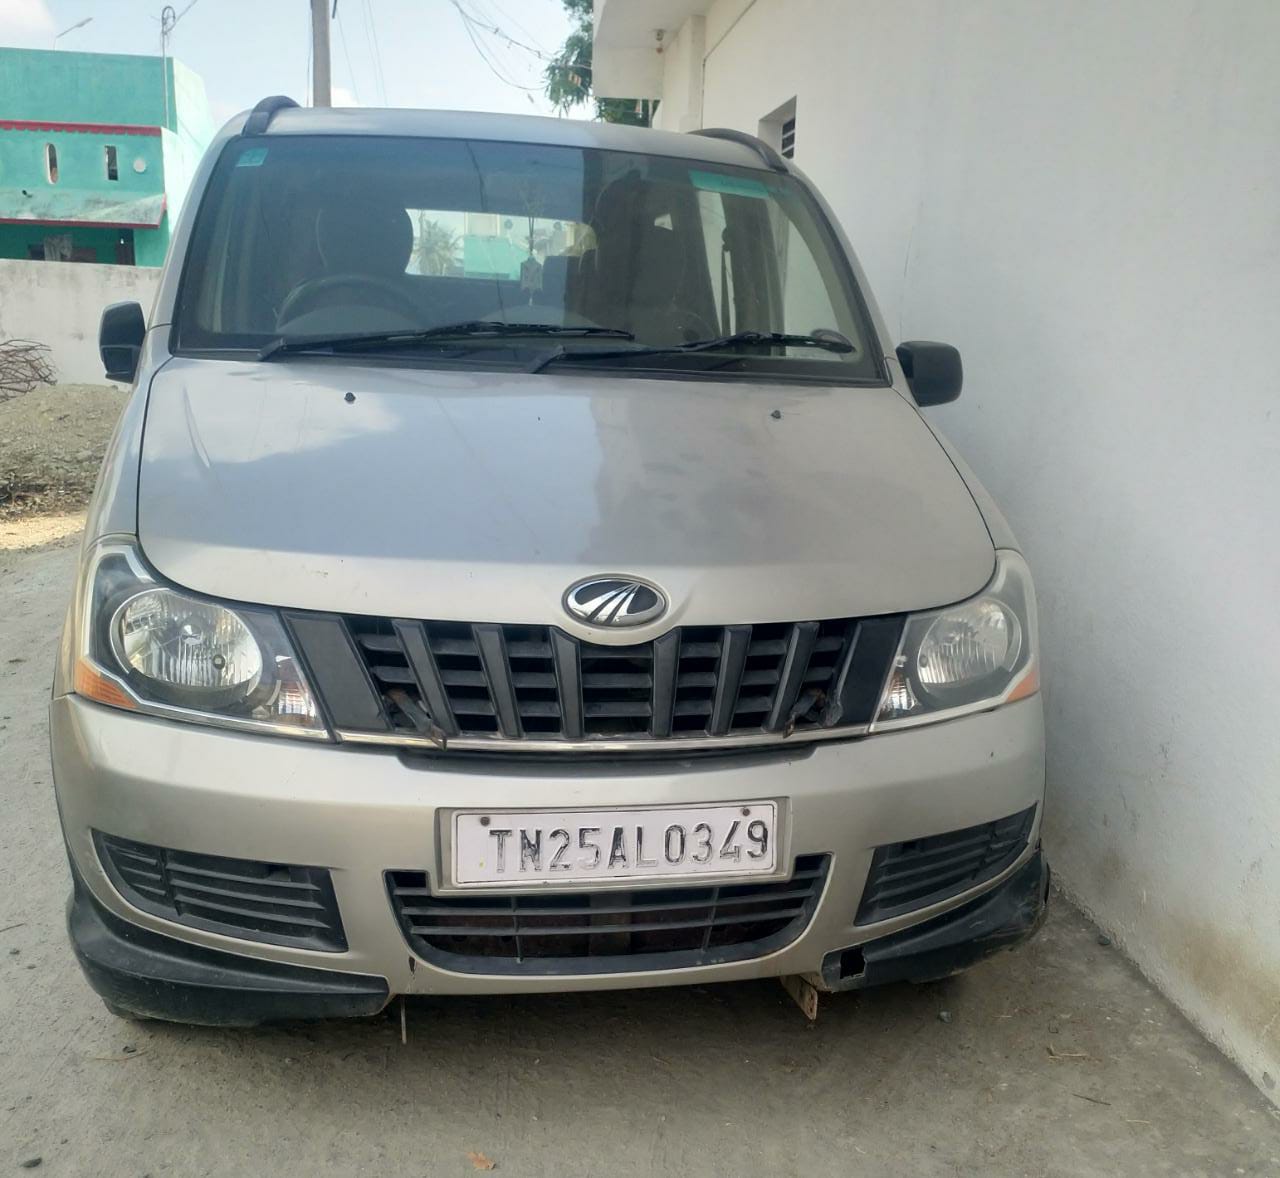 509-for-sale-MAHINDRA-Xylo-Diesel-Second-Owner-2014-TN-registered-rs-395000